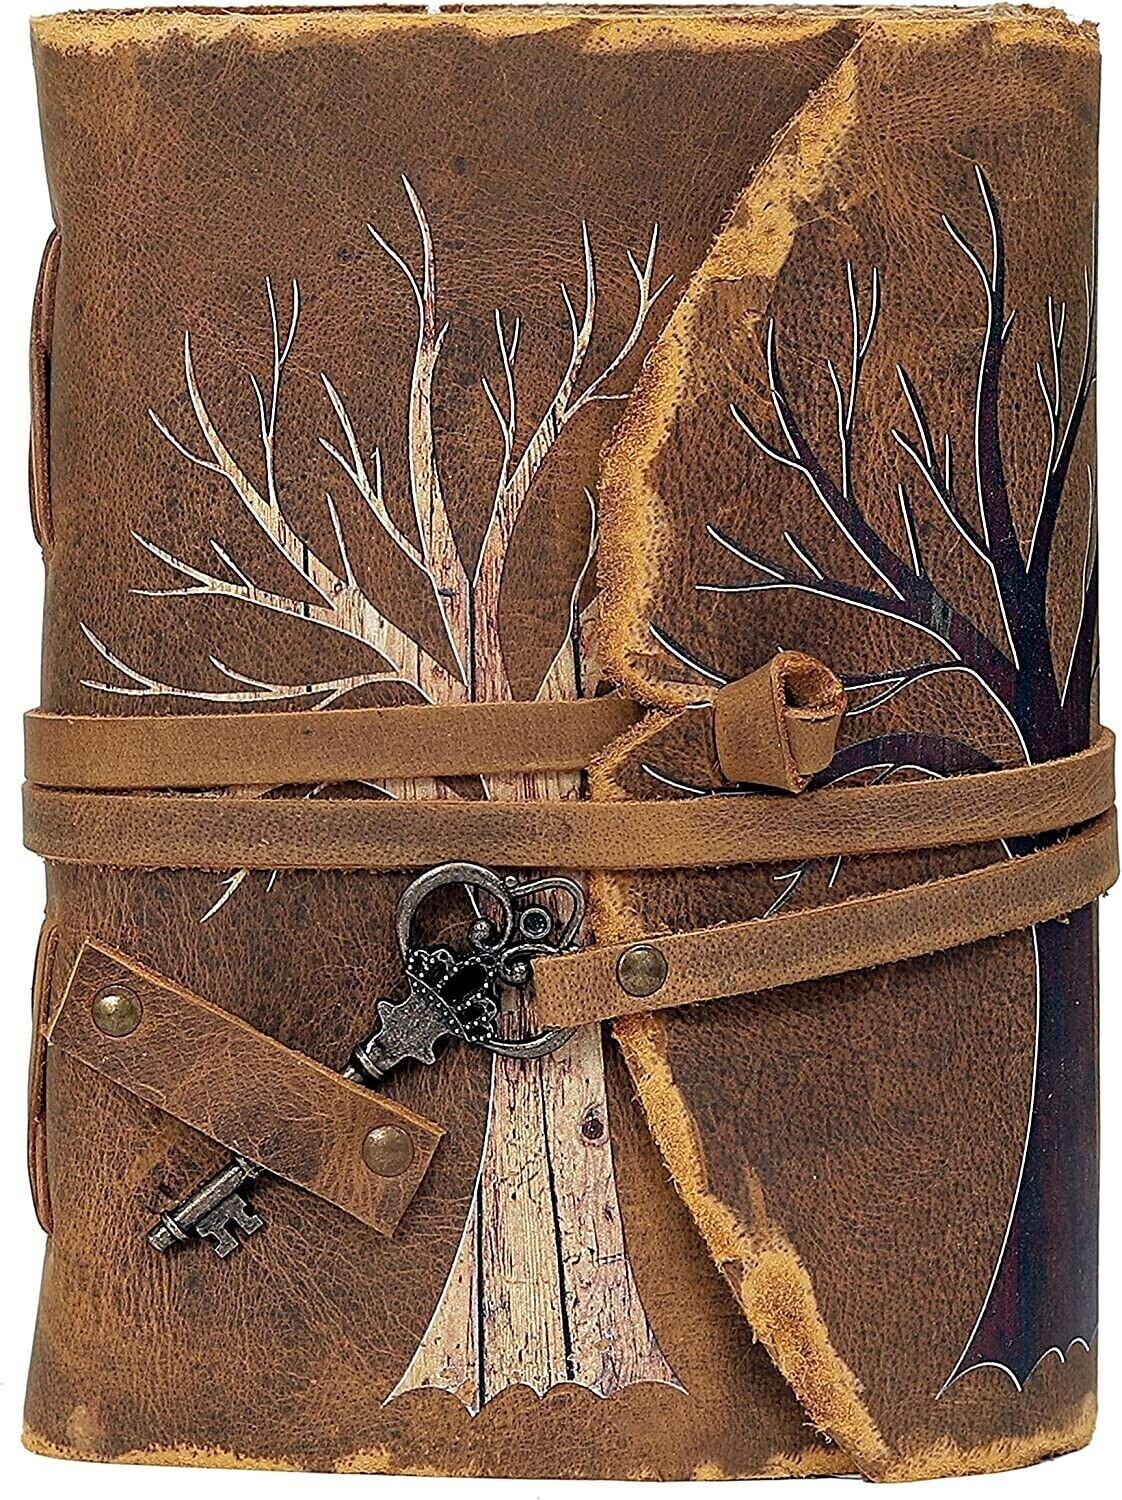 Leather Journal Tree of Life - Writing Notebook Handmade Leather Bound Daily NEW